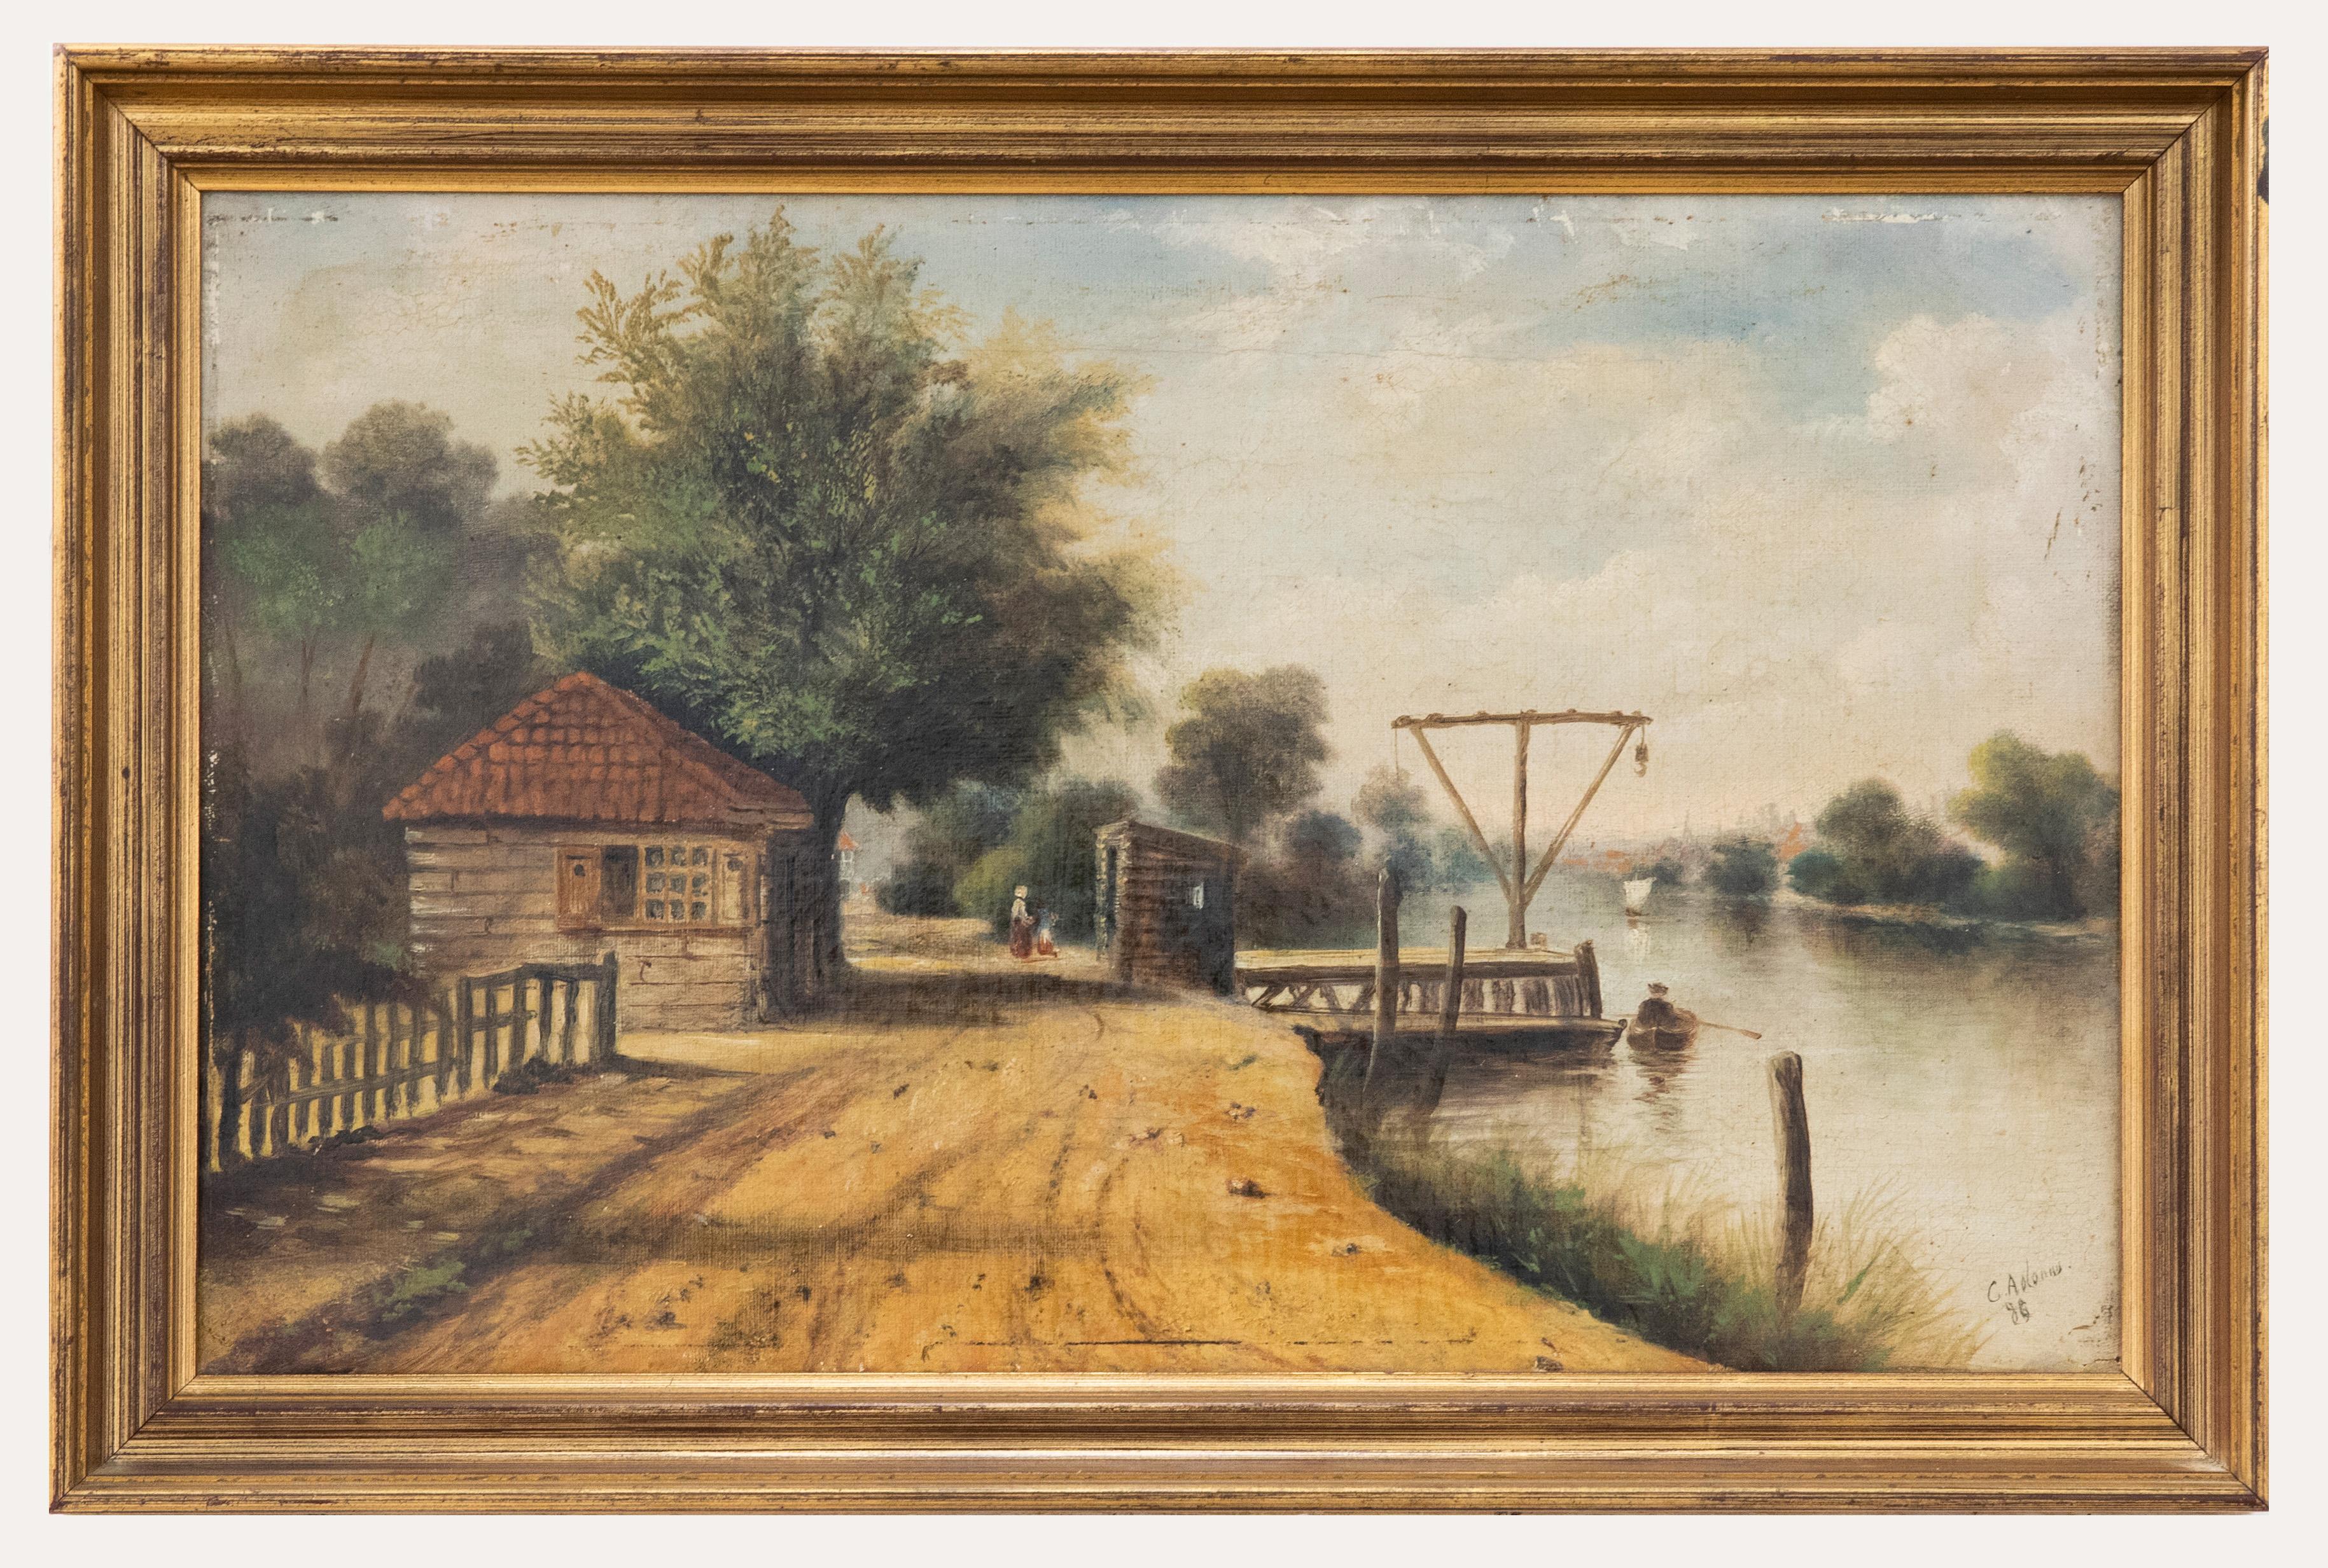 Unknown Landscape Painting - C. Adams - Framed Late 19th Century Oil, Waiting by the Jetty